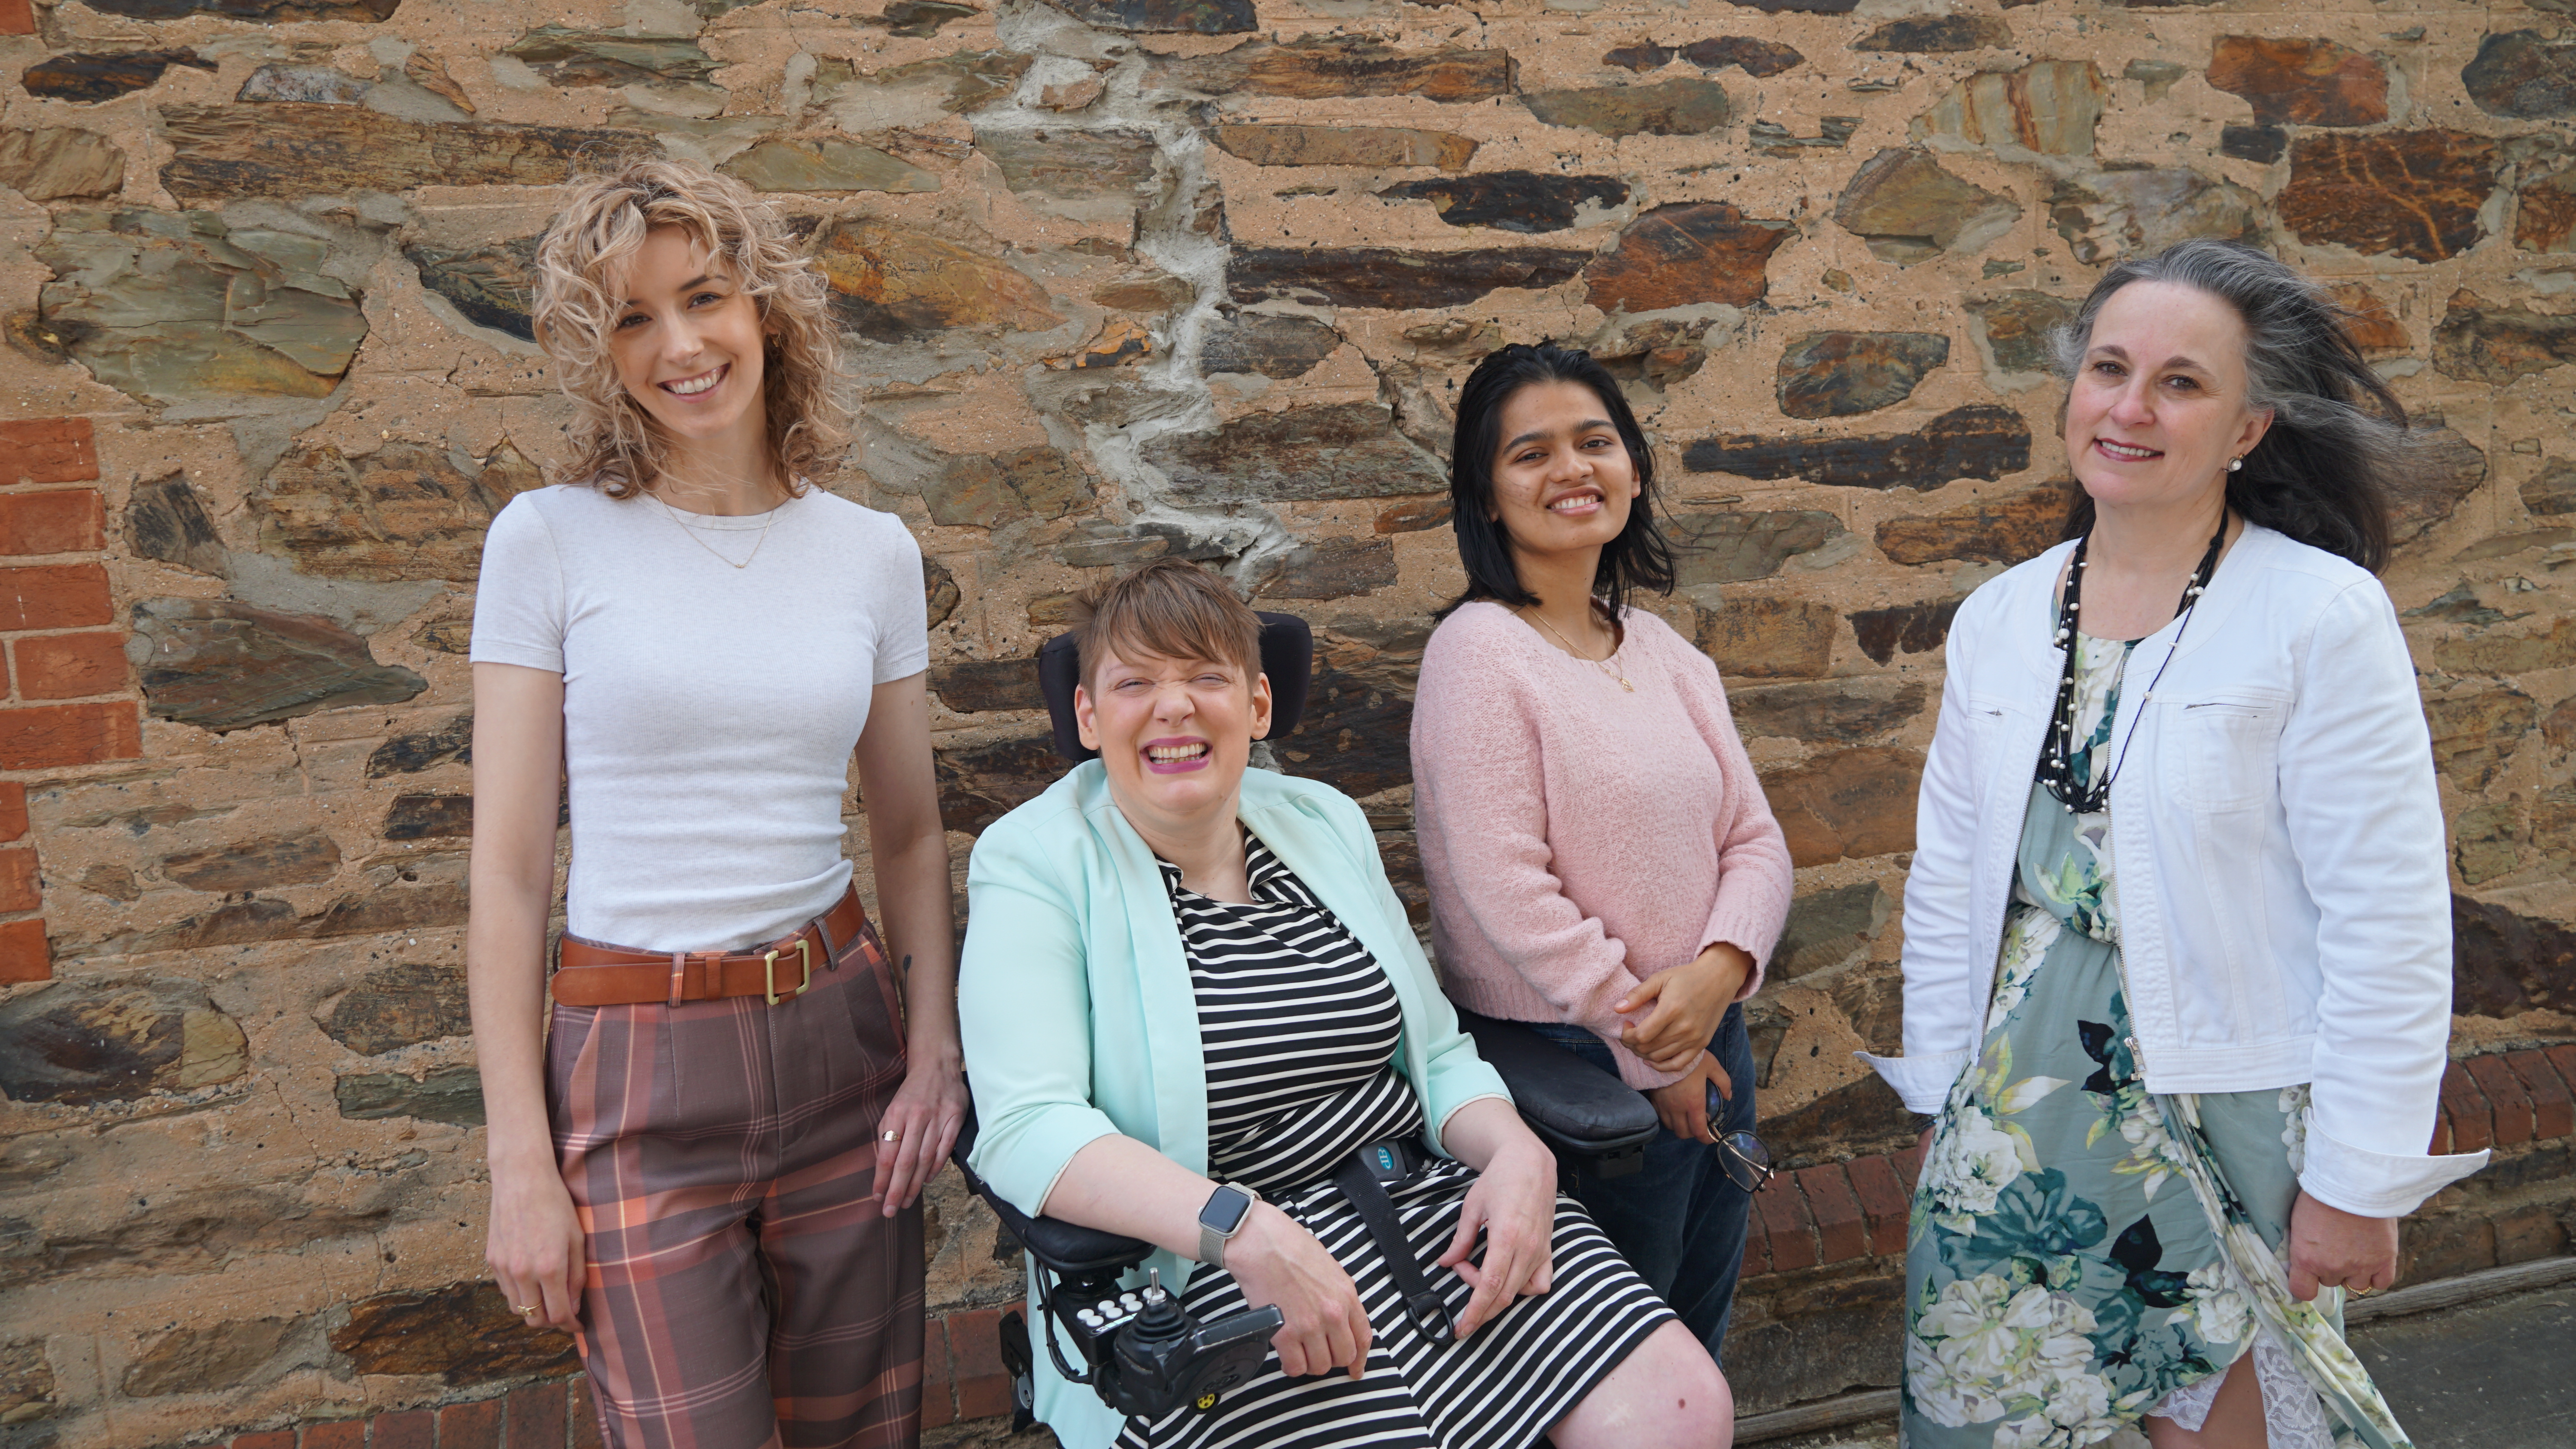 Four people posing in front of a brick wall. A white woman with blonde curly hair wearing a white t-shirt and plaid pants, standing next to a white person in a wheelchair with a brown pixie haircut, wearing a striped dress and aqua blue blazer. Another wo